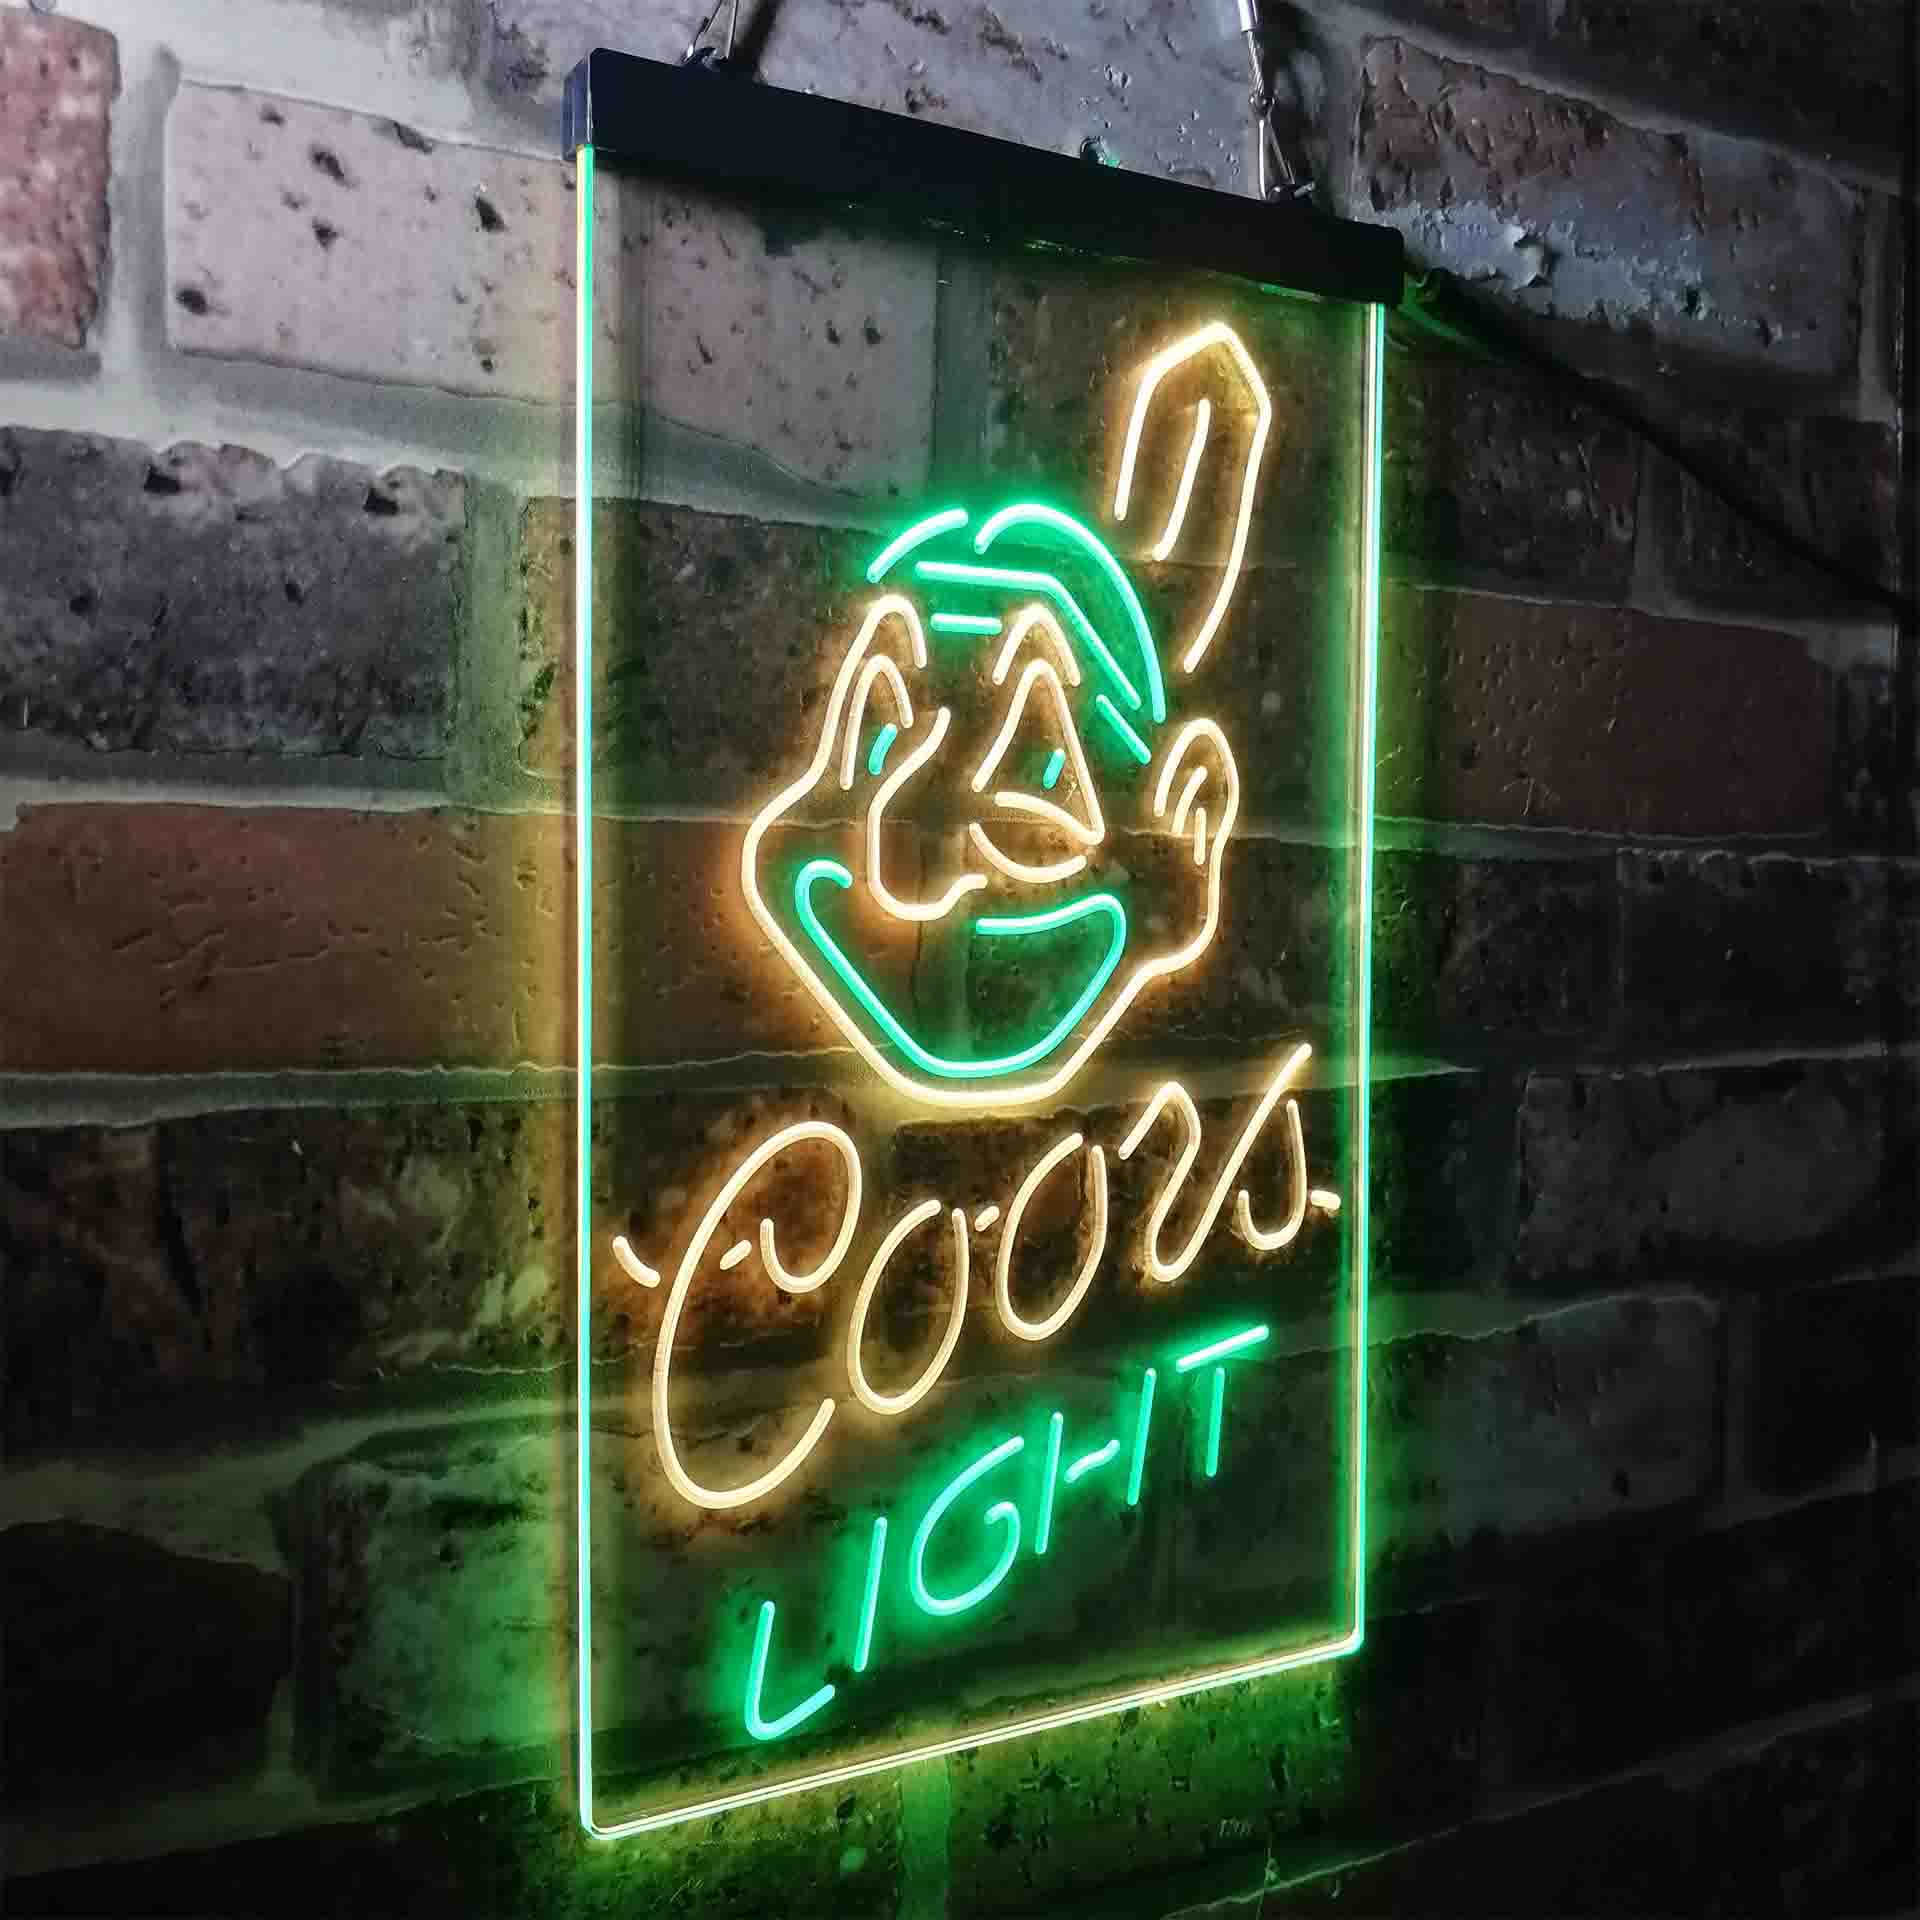 Cleveland Indians Coors Light LED Neon Sign